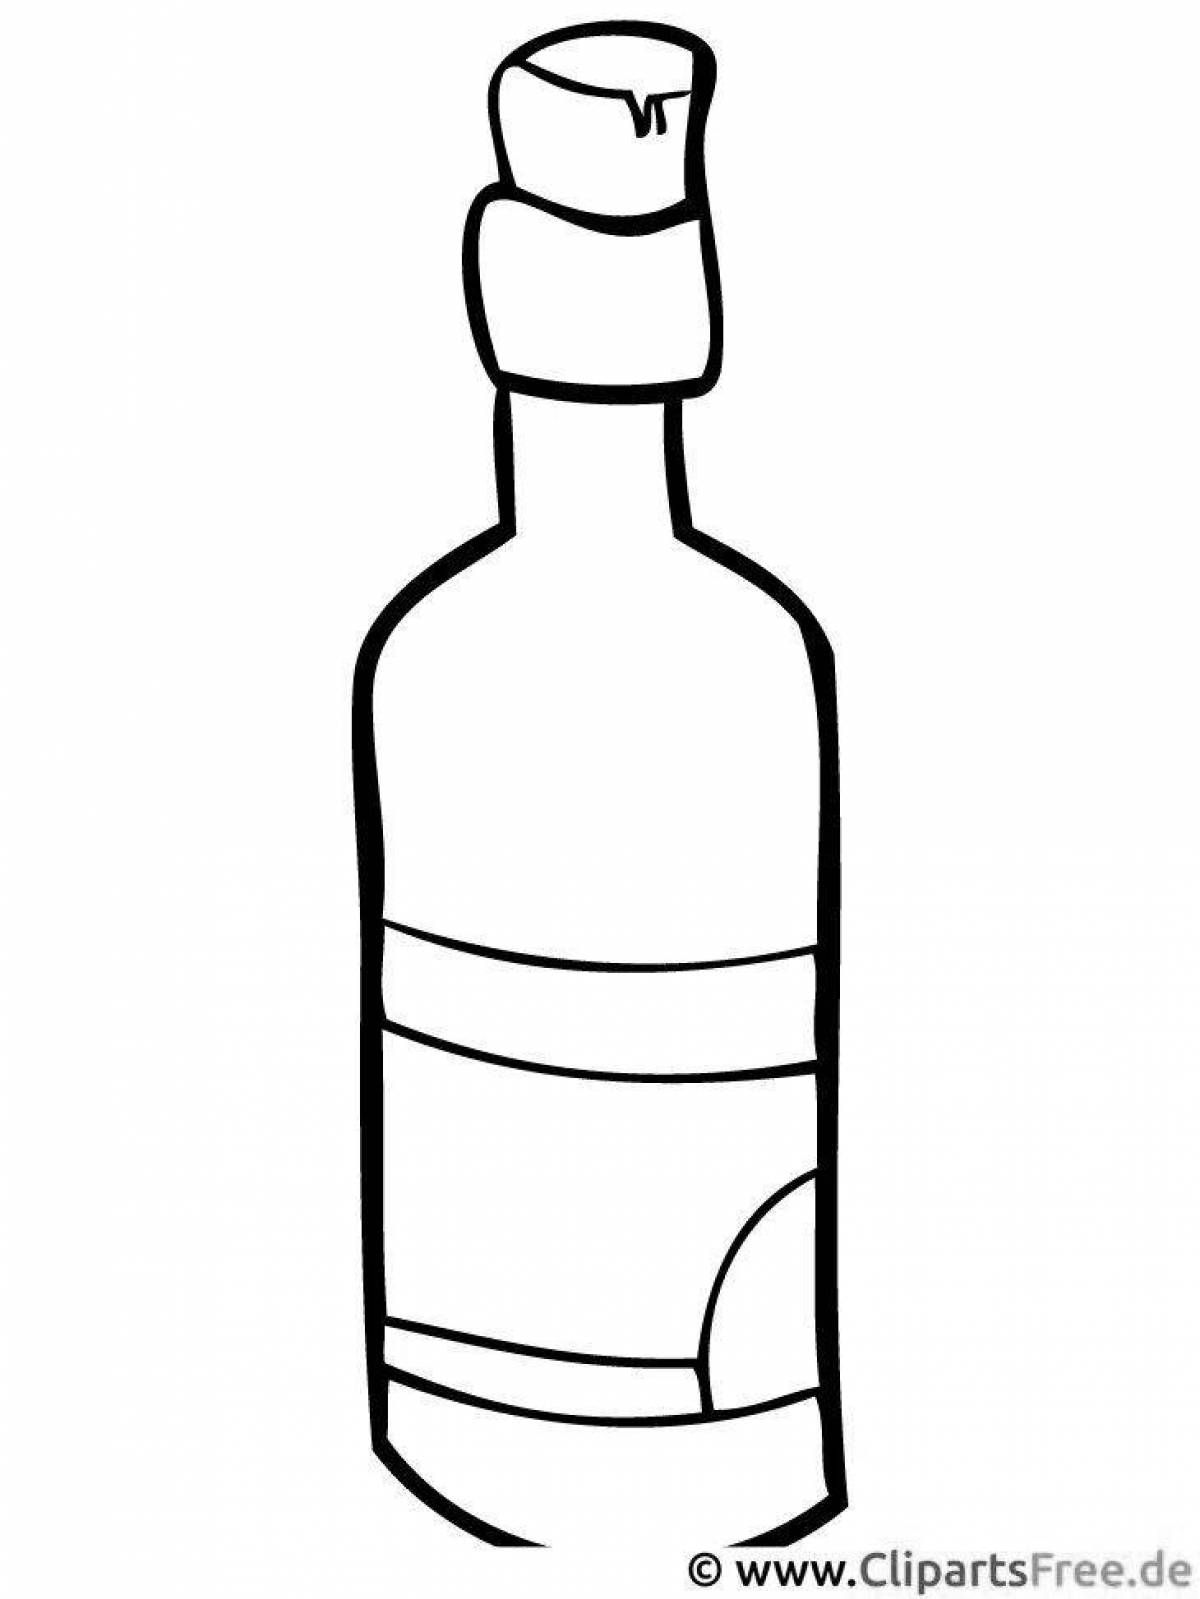 Fun bottle coloring page